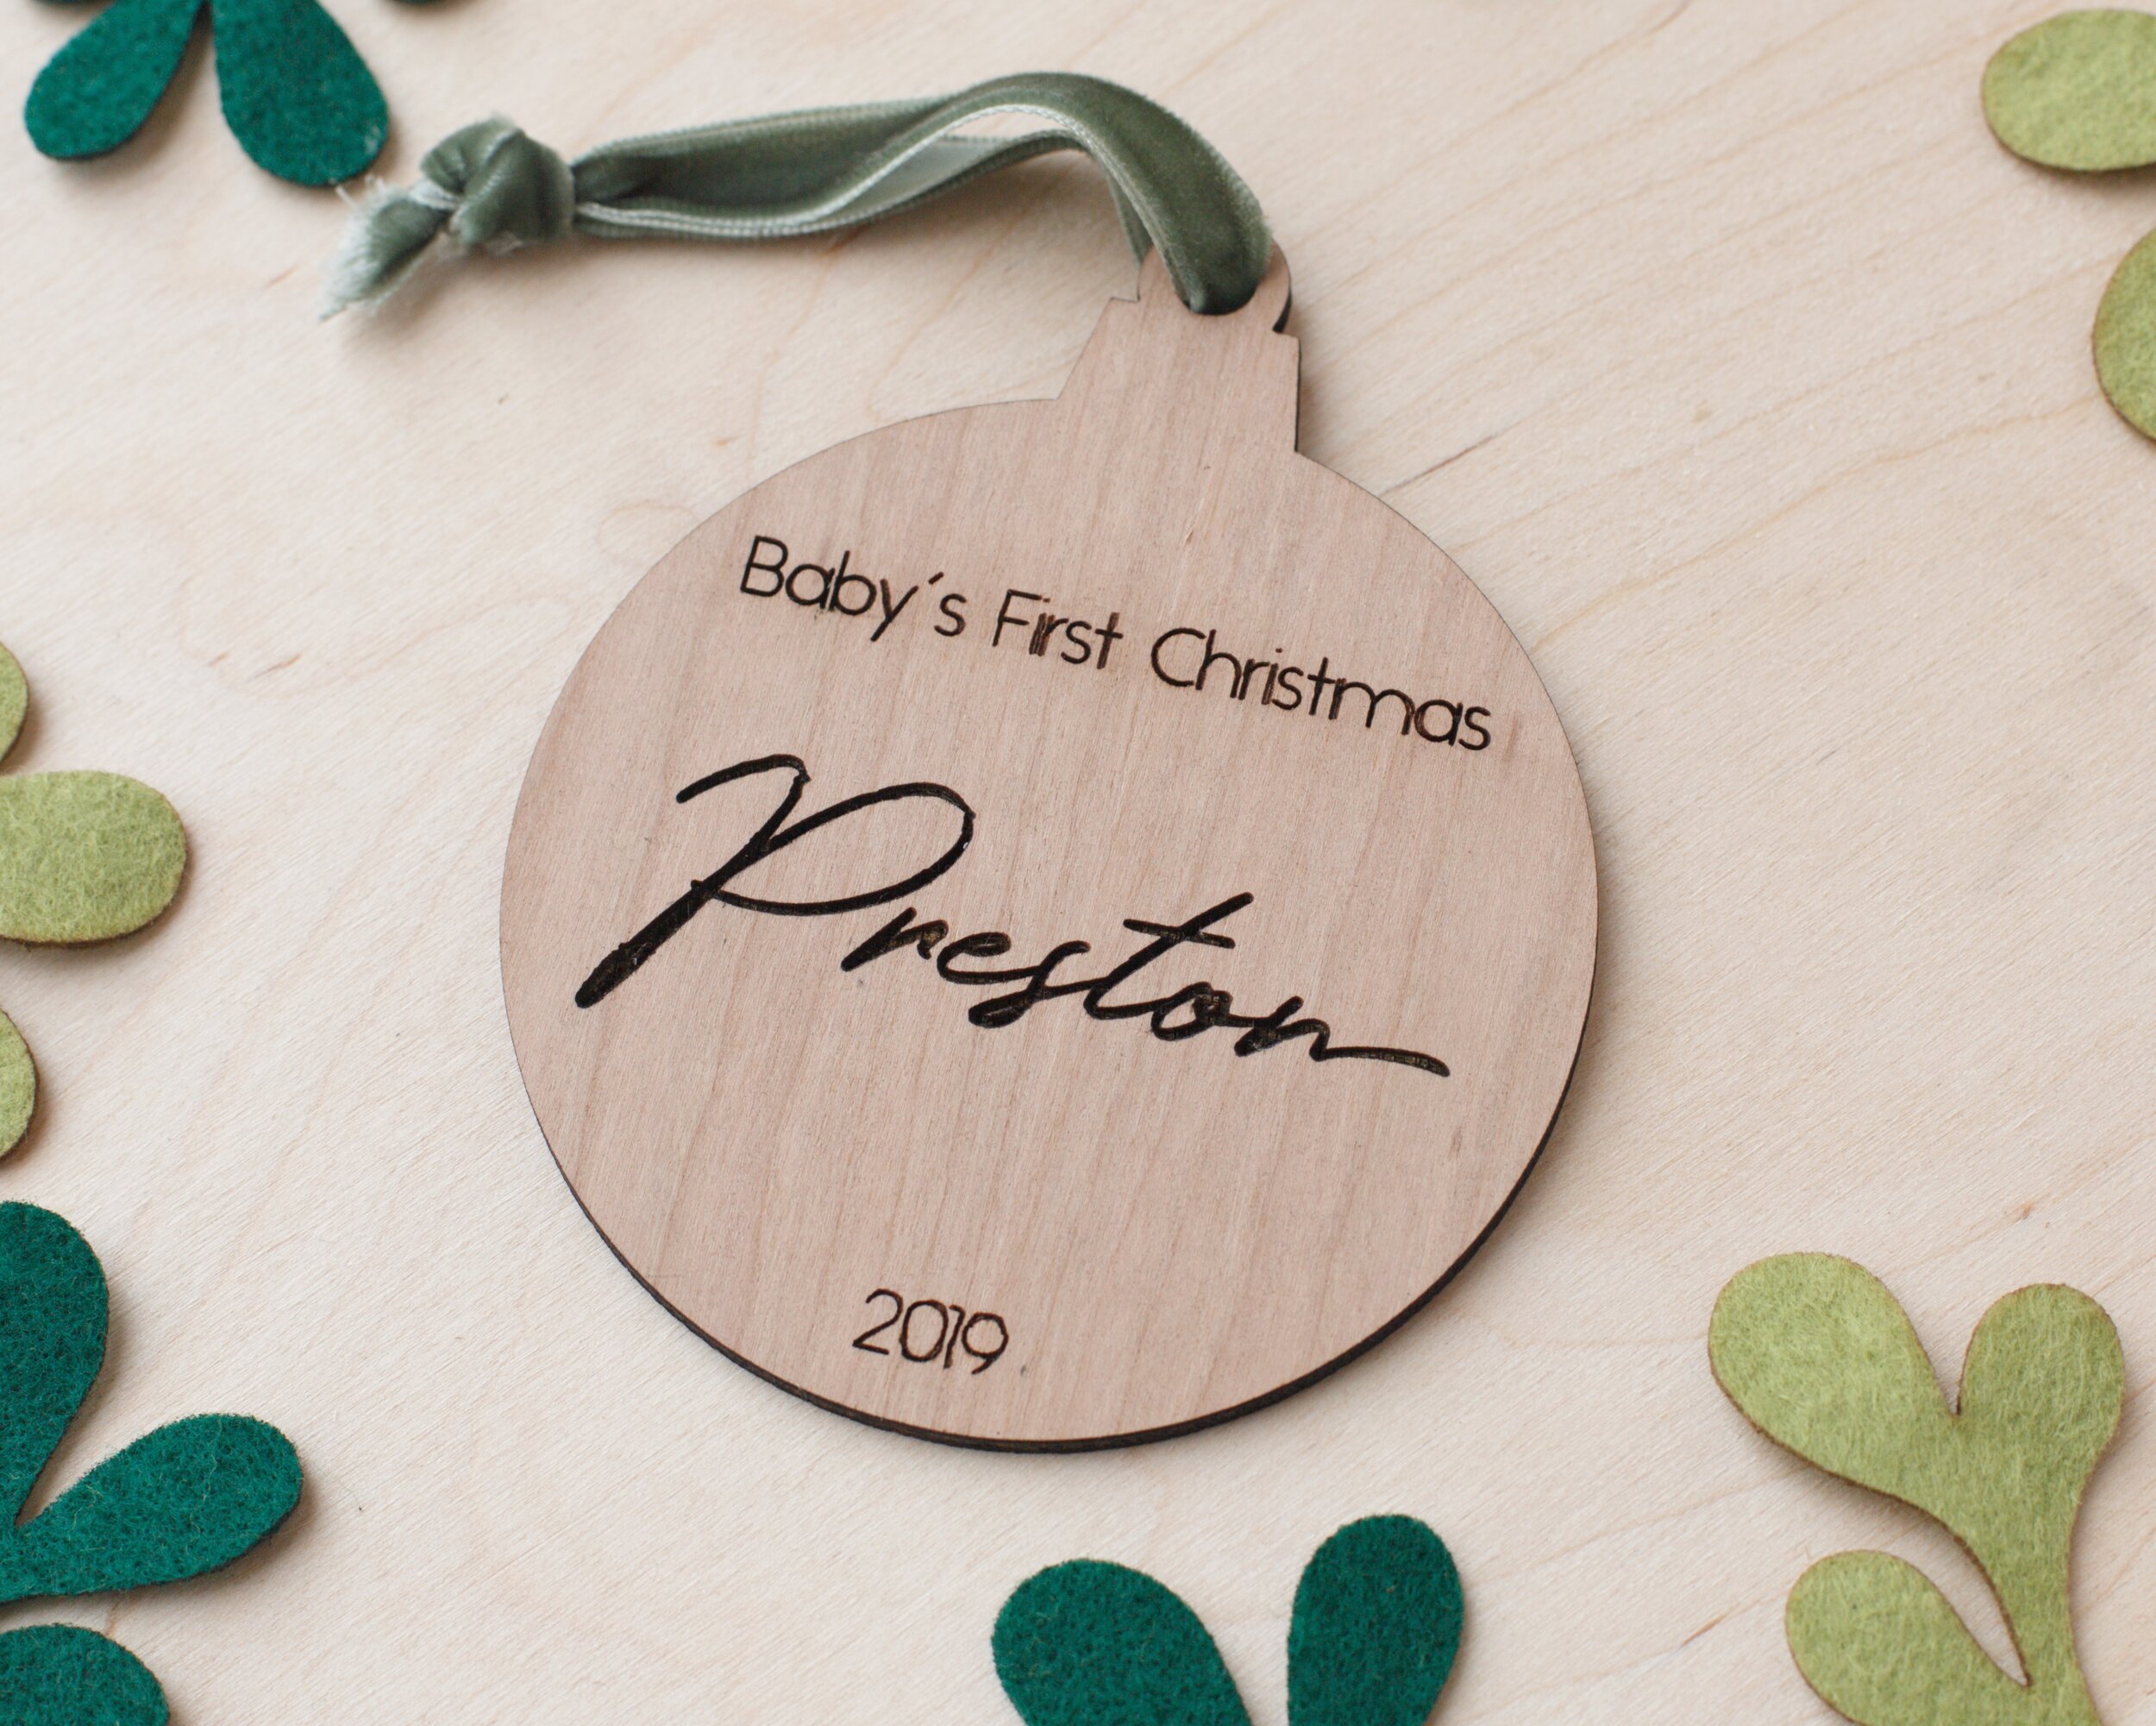 cut-etched-cherry-wood-round-bulb-babys-first-christmas-name-preston-ornament-2019.jpg